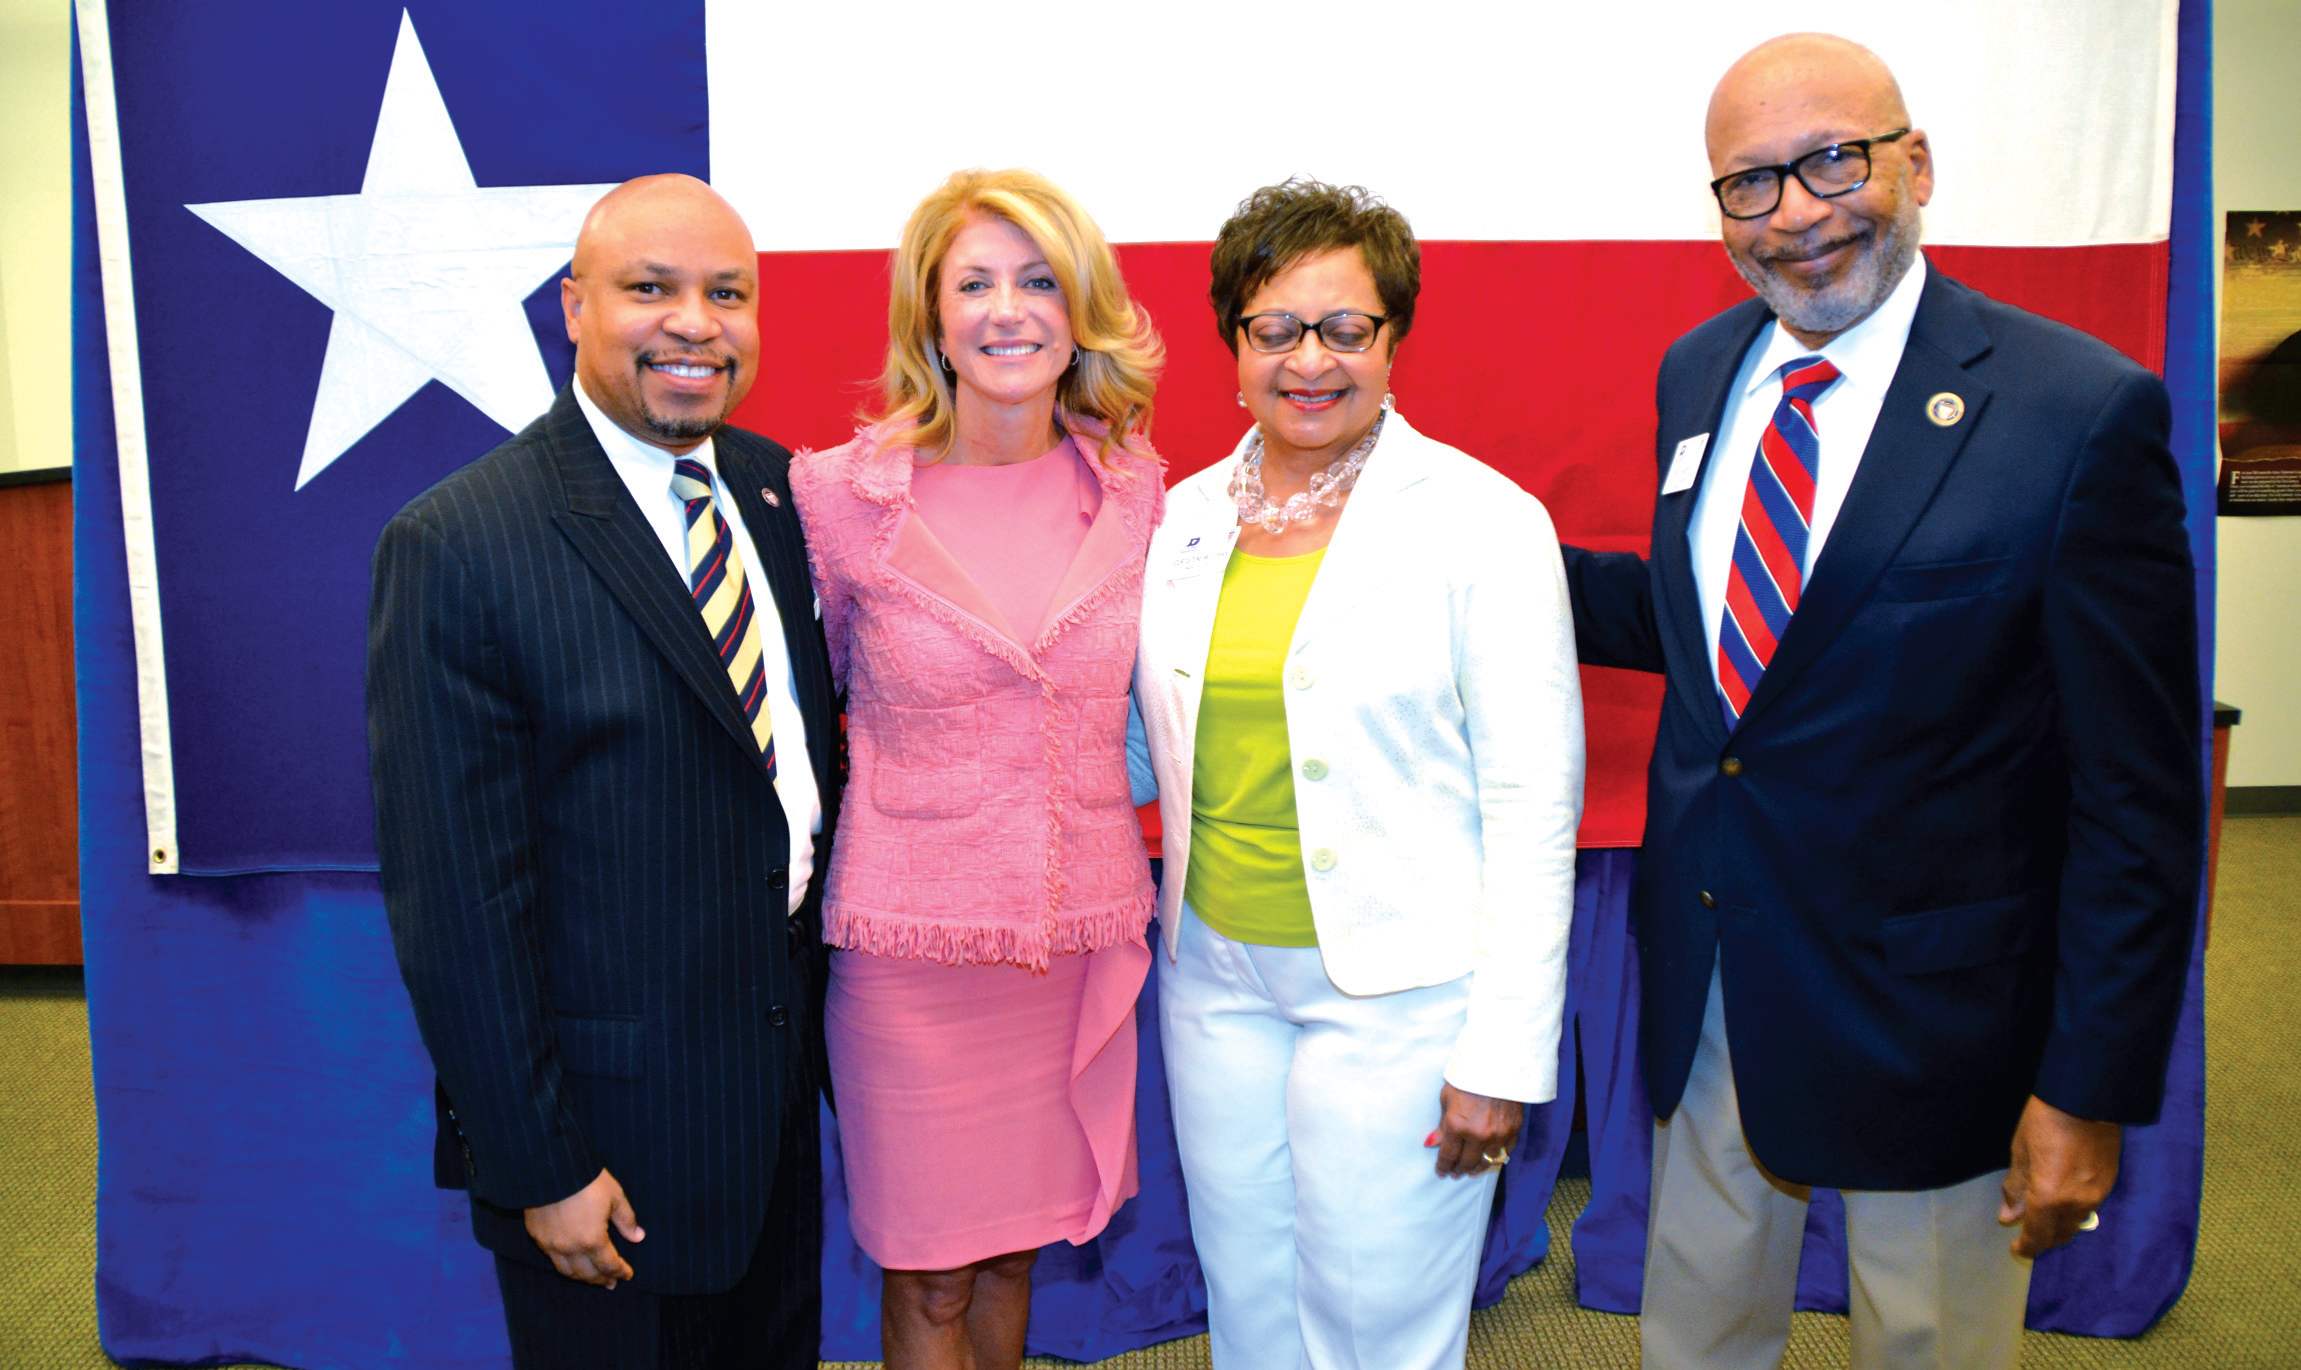 Texas gubernatorial candidate Wendy Davis made a campaign stop at DeSoto High School. Above she poses with Mayor Carl Sherman and Council Members Curtistene McCown and Richard North